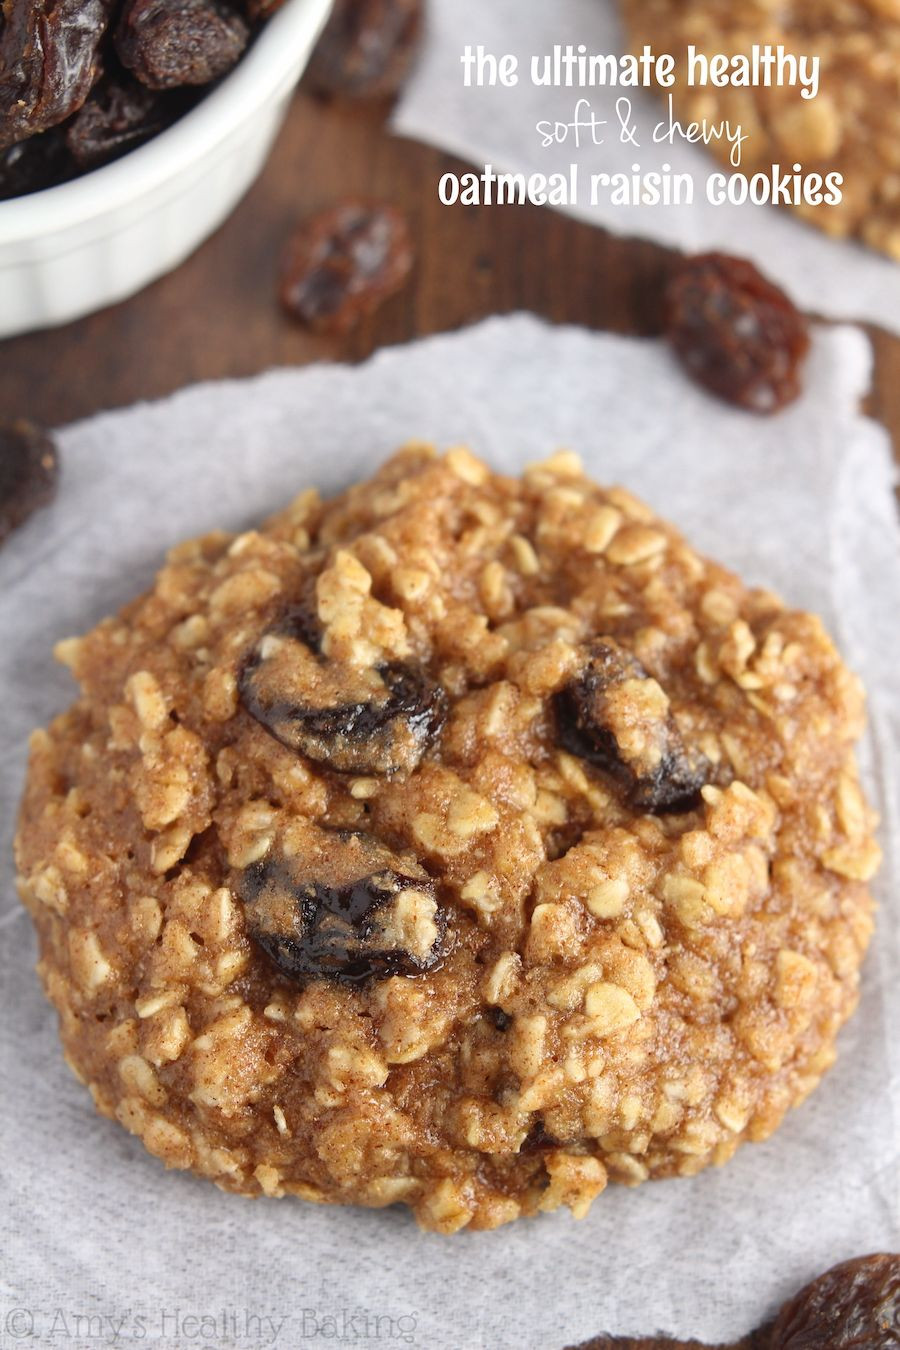 Healthy Oatmeal Raisin Cookies With Honey
 The Ultimate Healthy Soft & Chewy Oatmeal Raisin Cookies